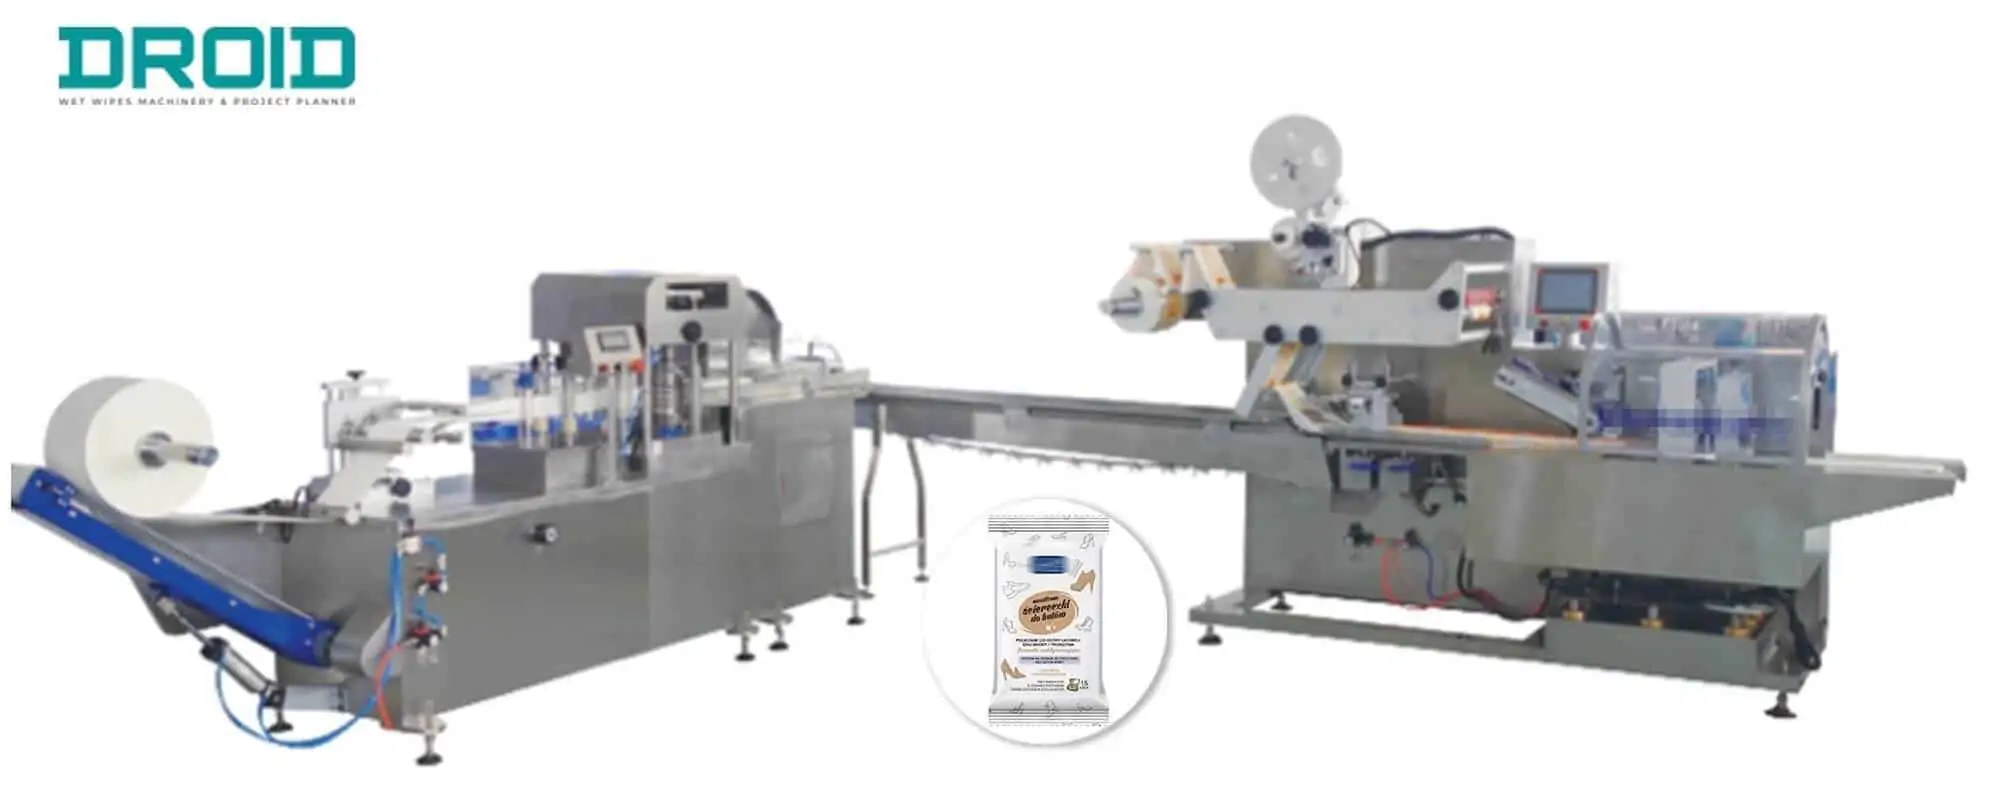 UT FL1UT WP cross fold wet wipes machine - Are you looking for Disinfectant Wet Wipes Machine?